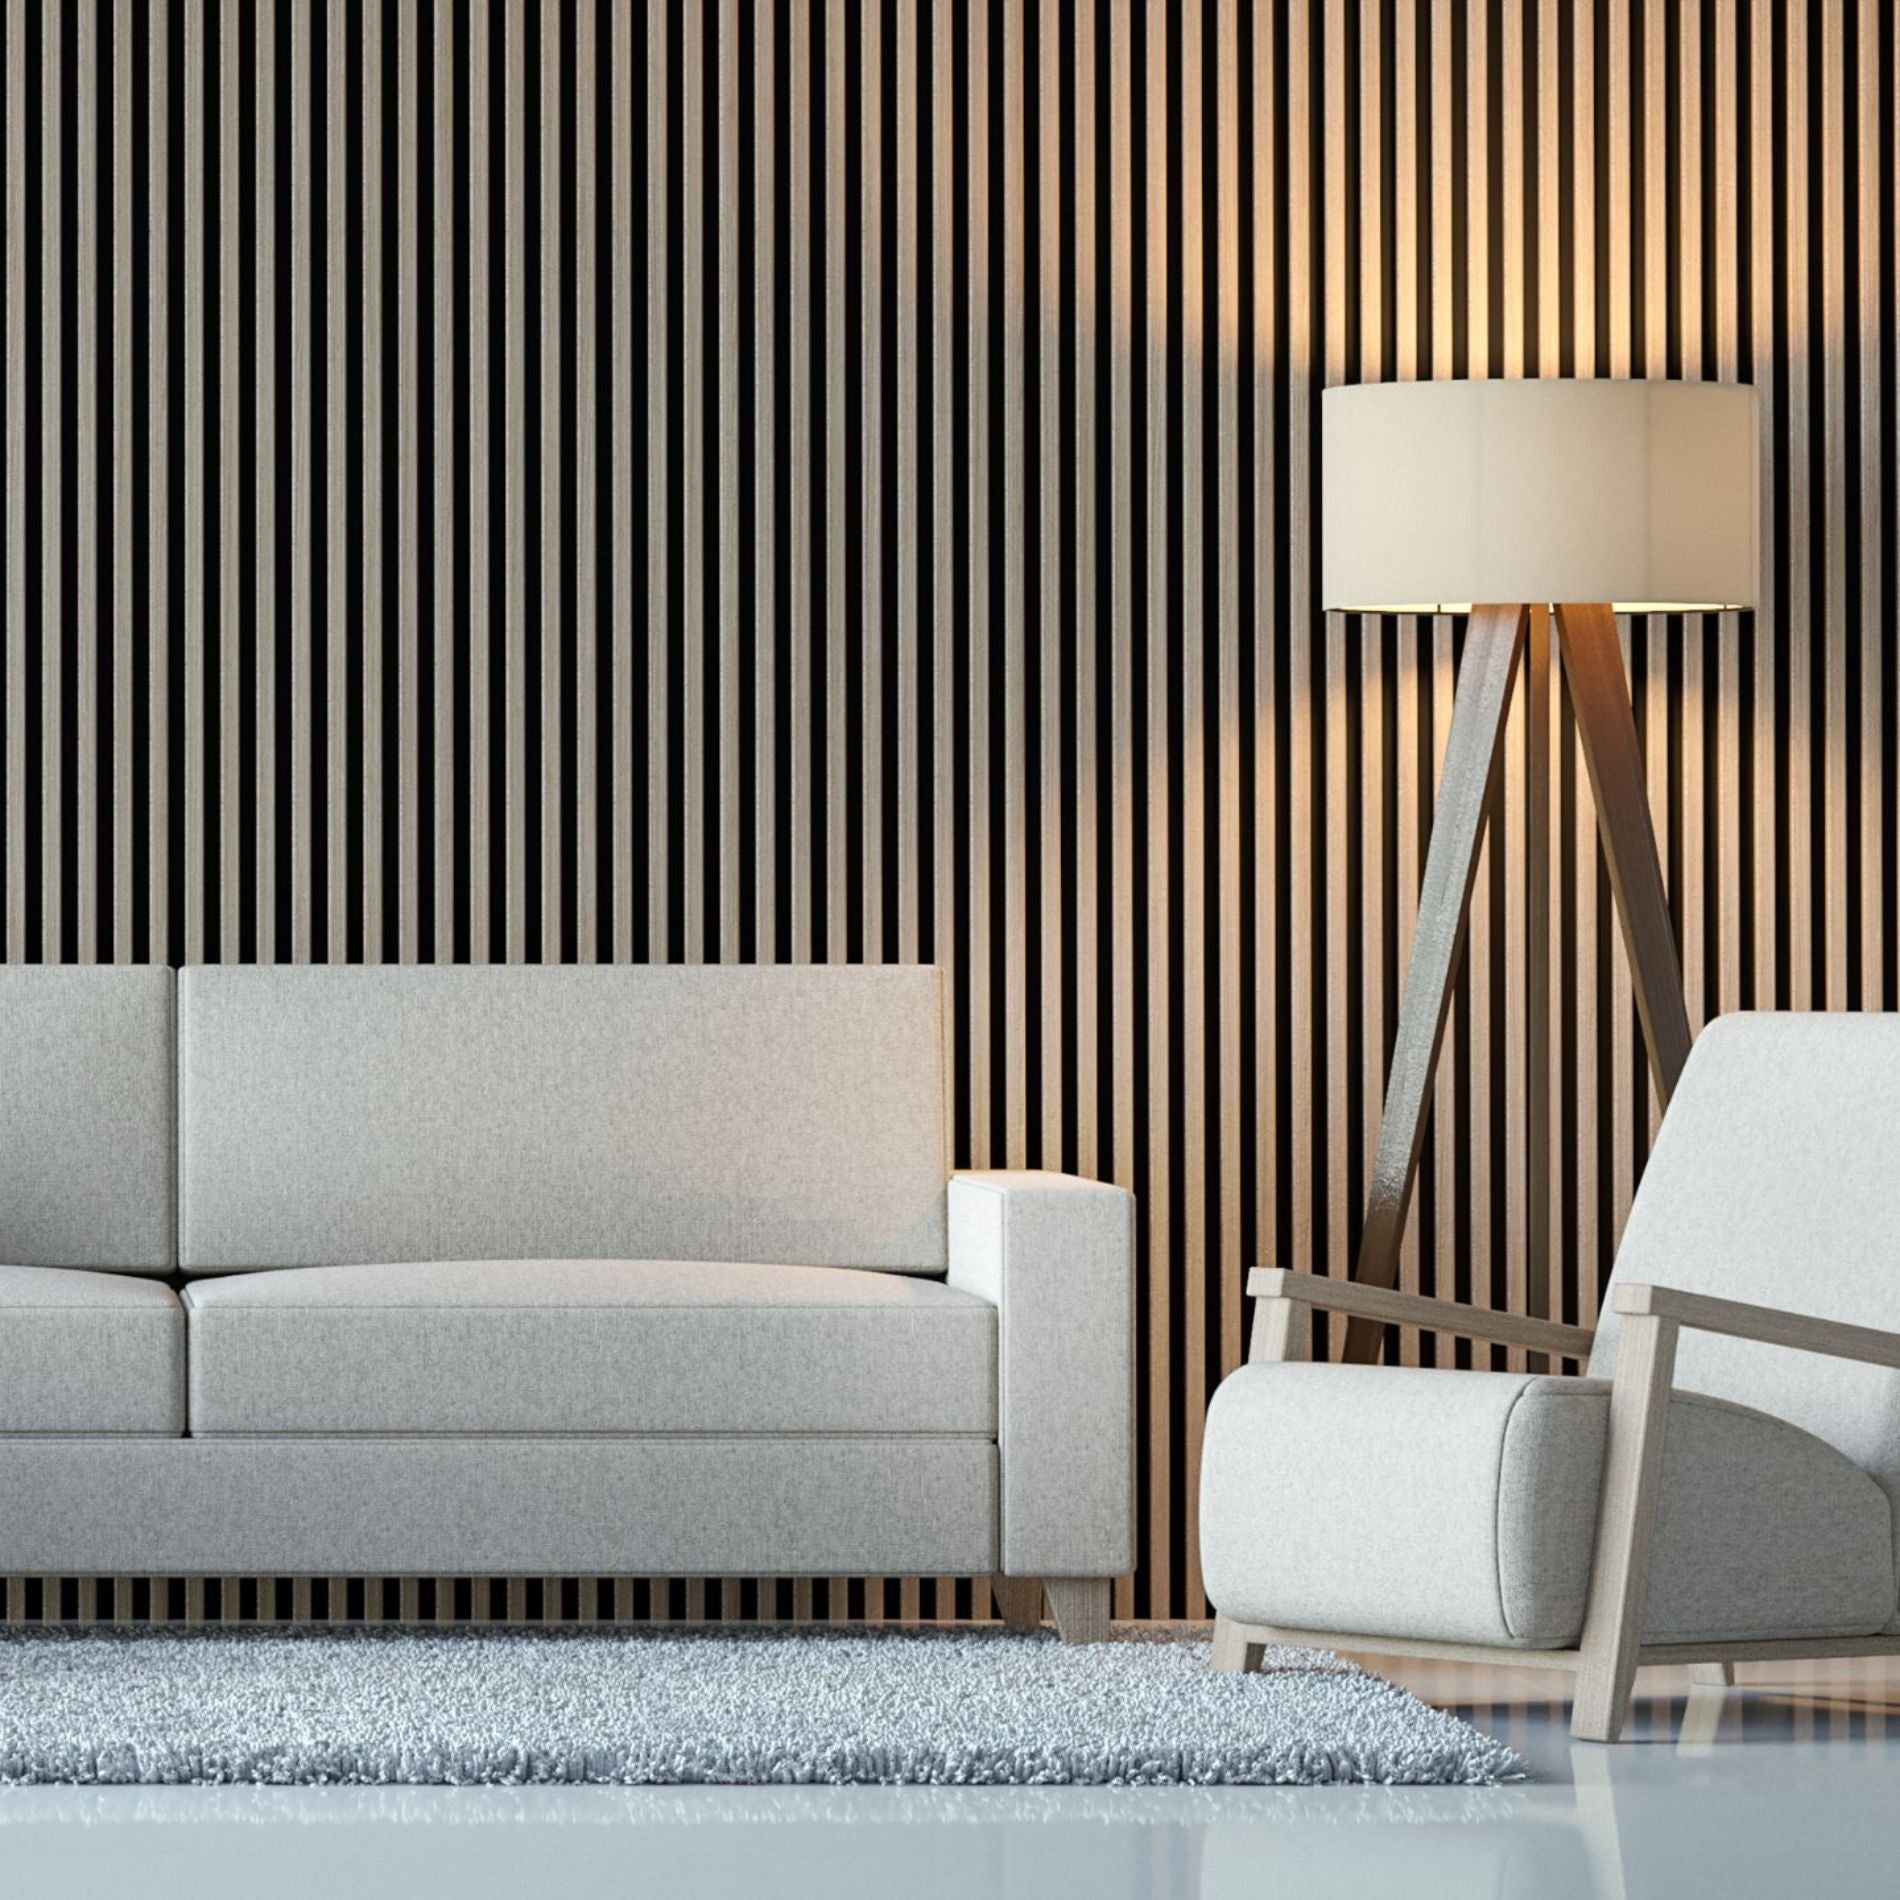 Modern furniture with wood slat accent wall